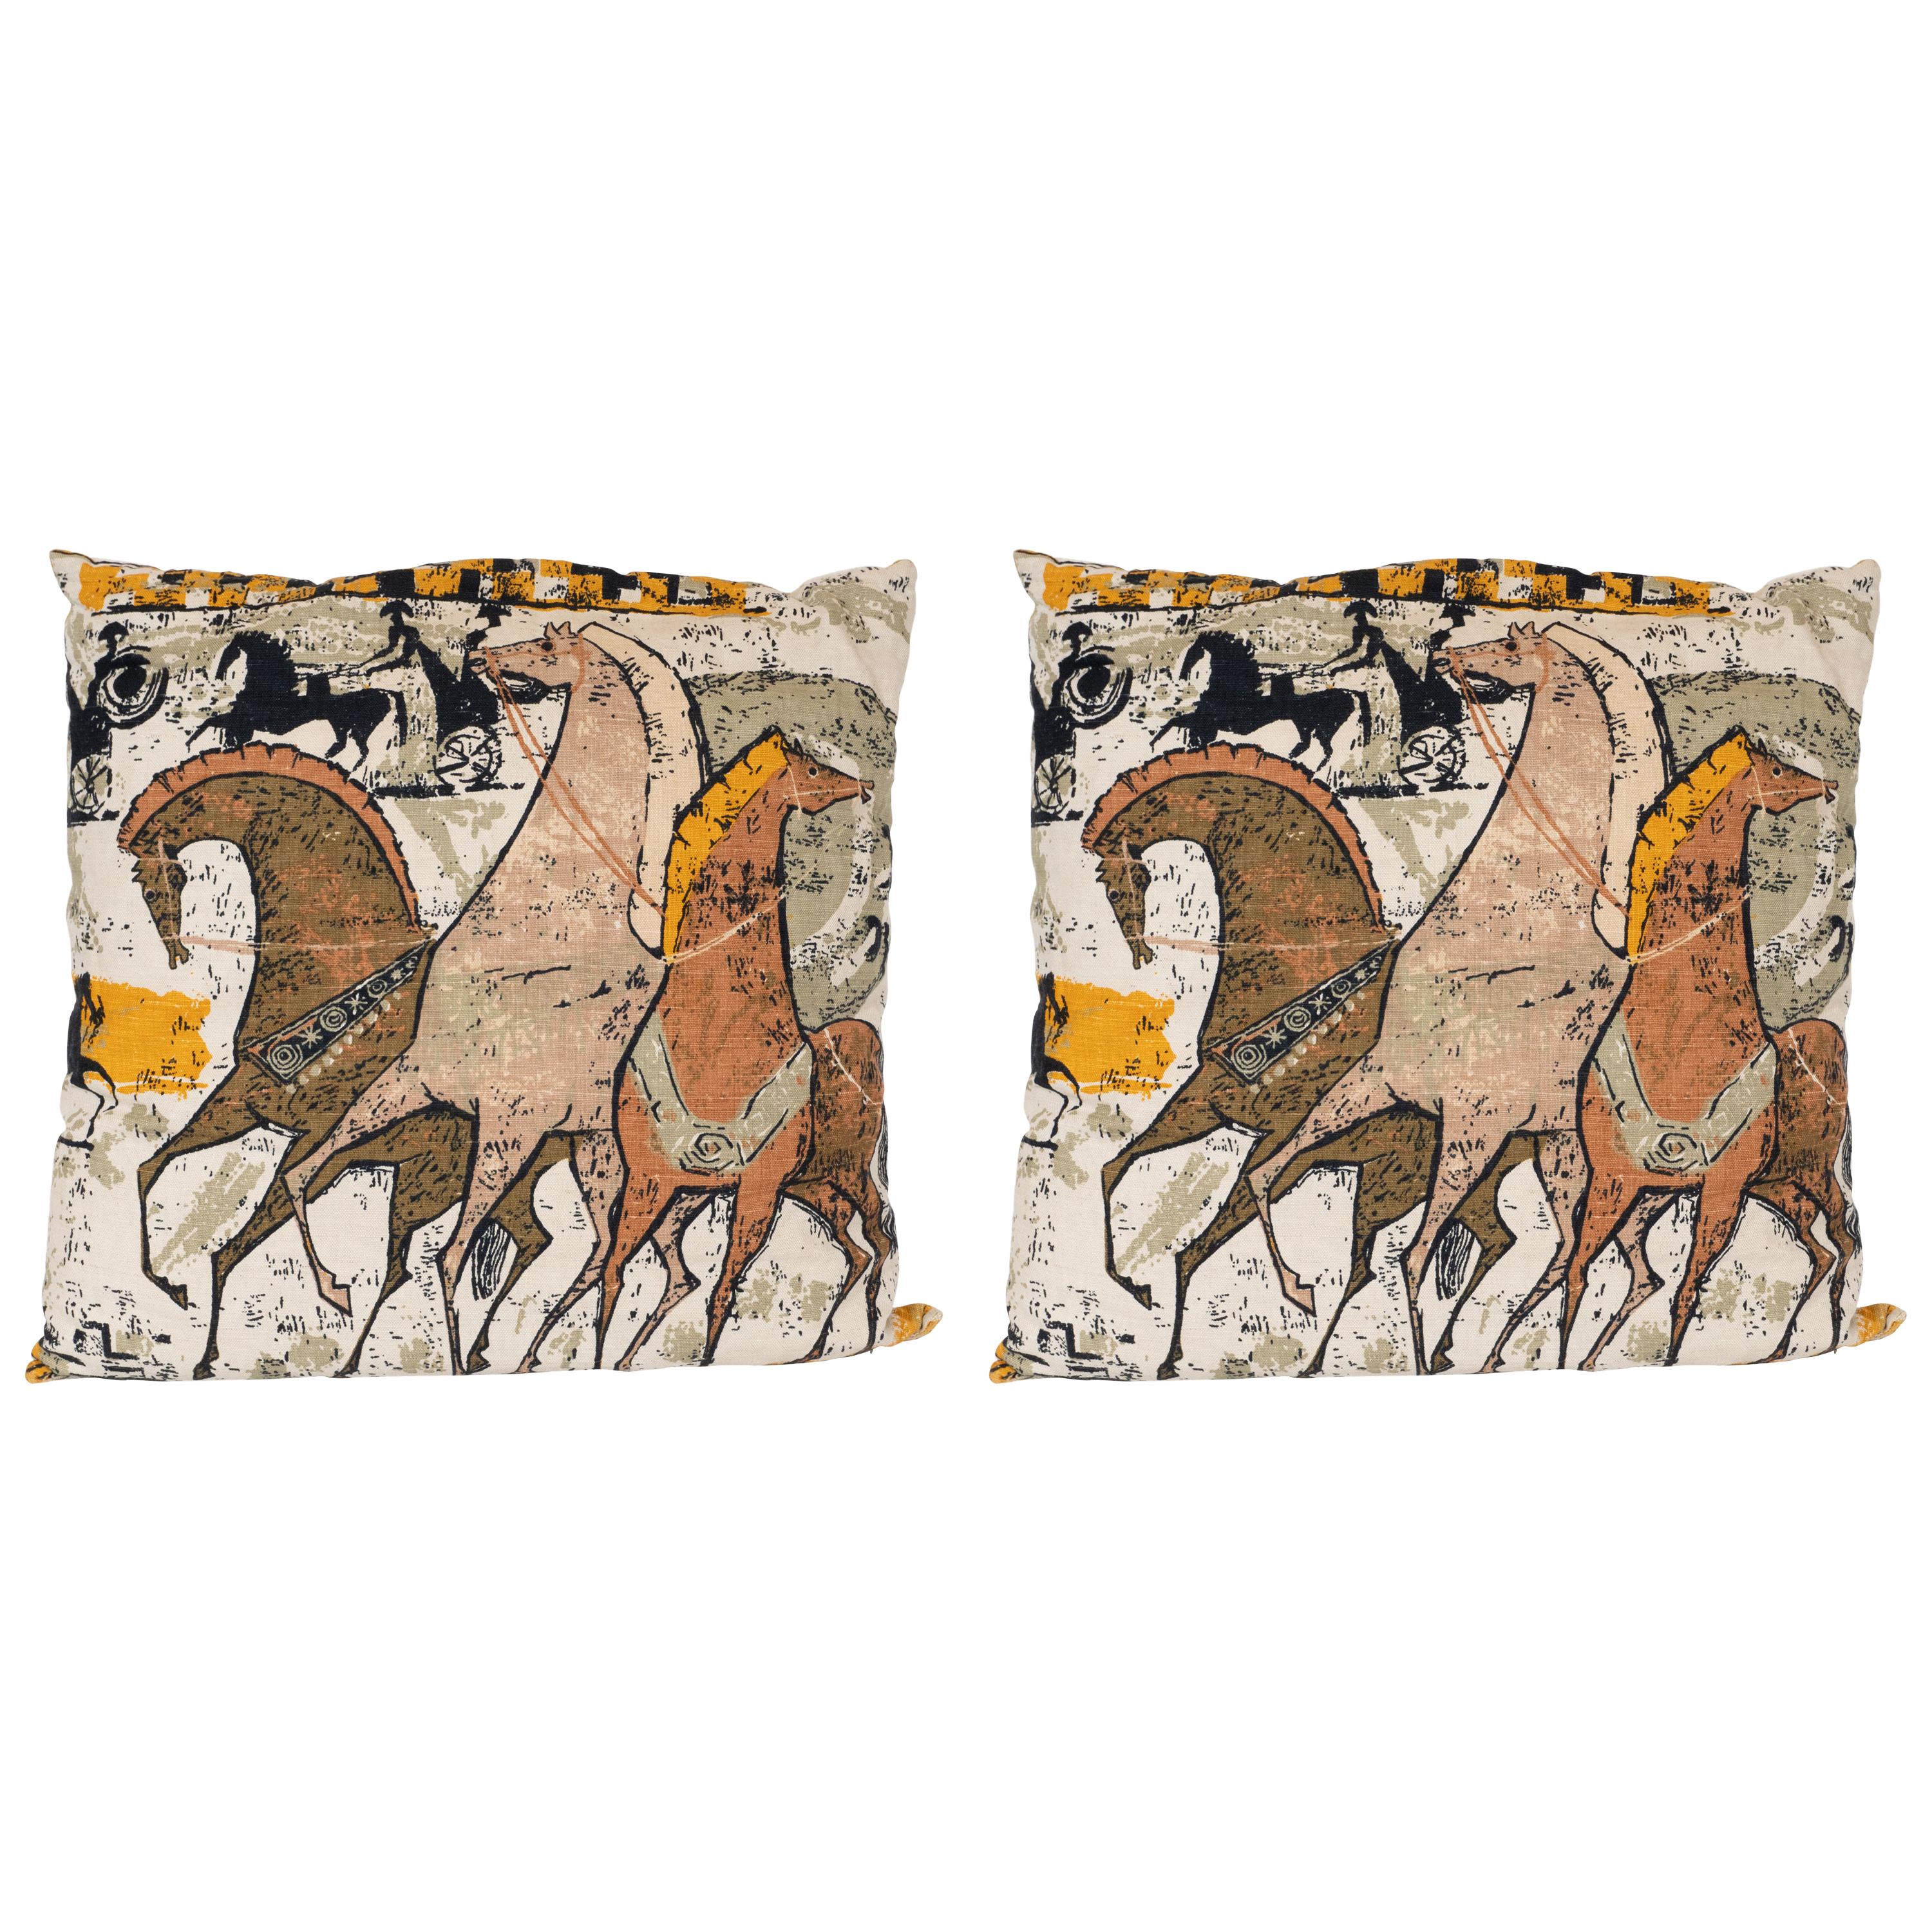 Pair of Charles Eames Etruscan Print Pillows with Raised Diamond Print Backing